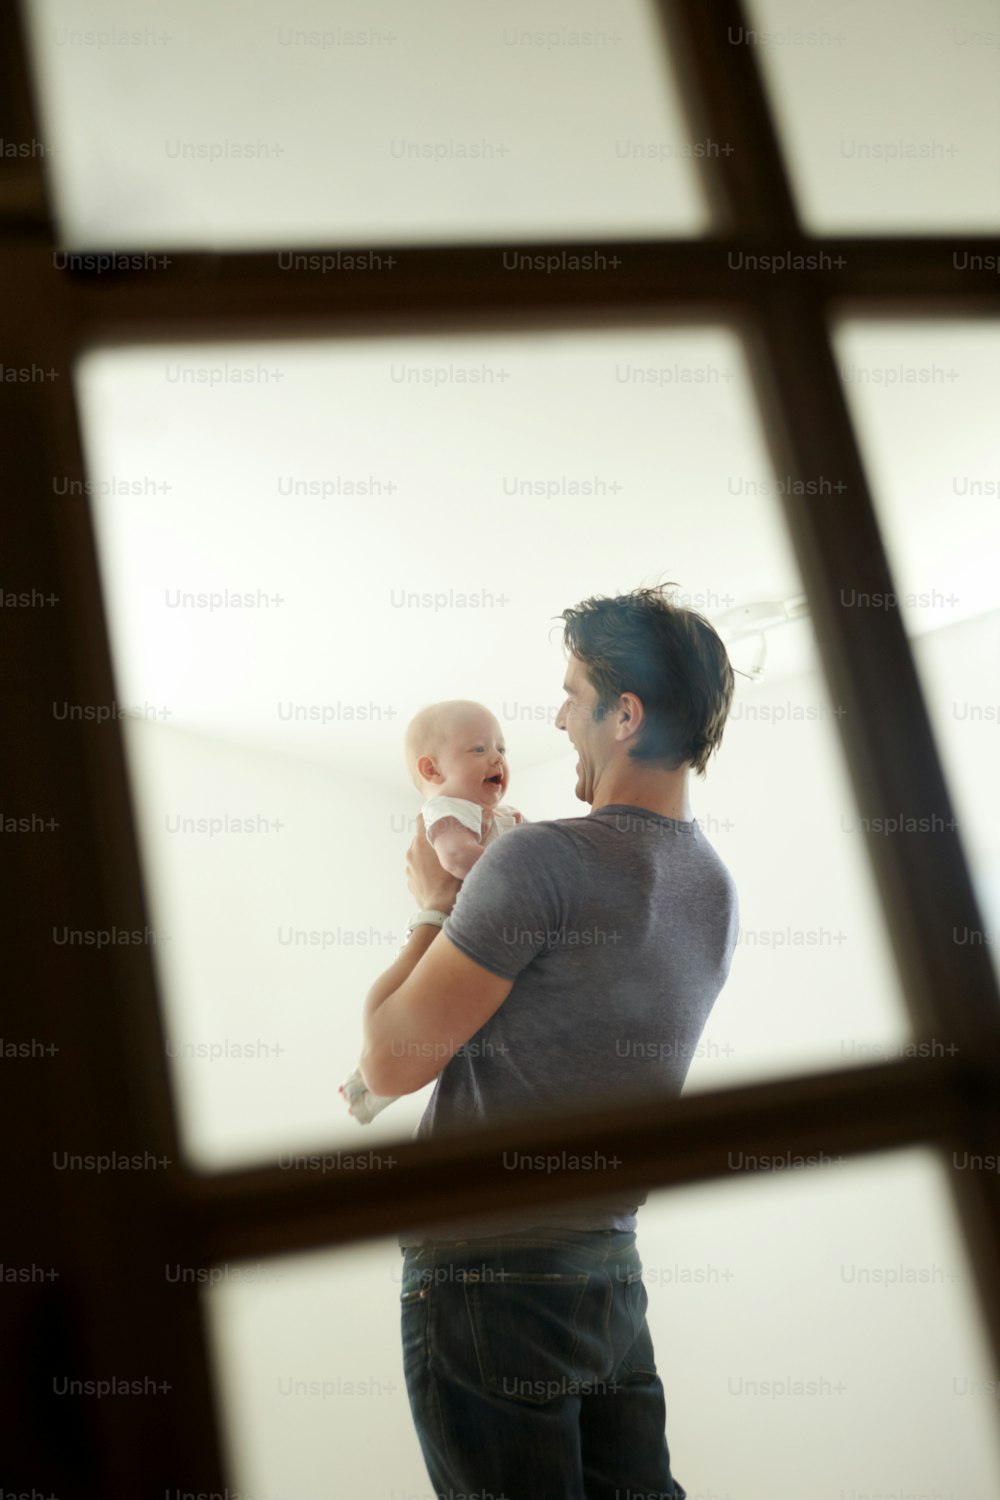 A candid image of a loving father holding his son shot through a window